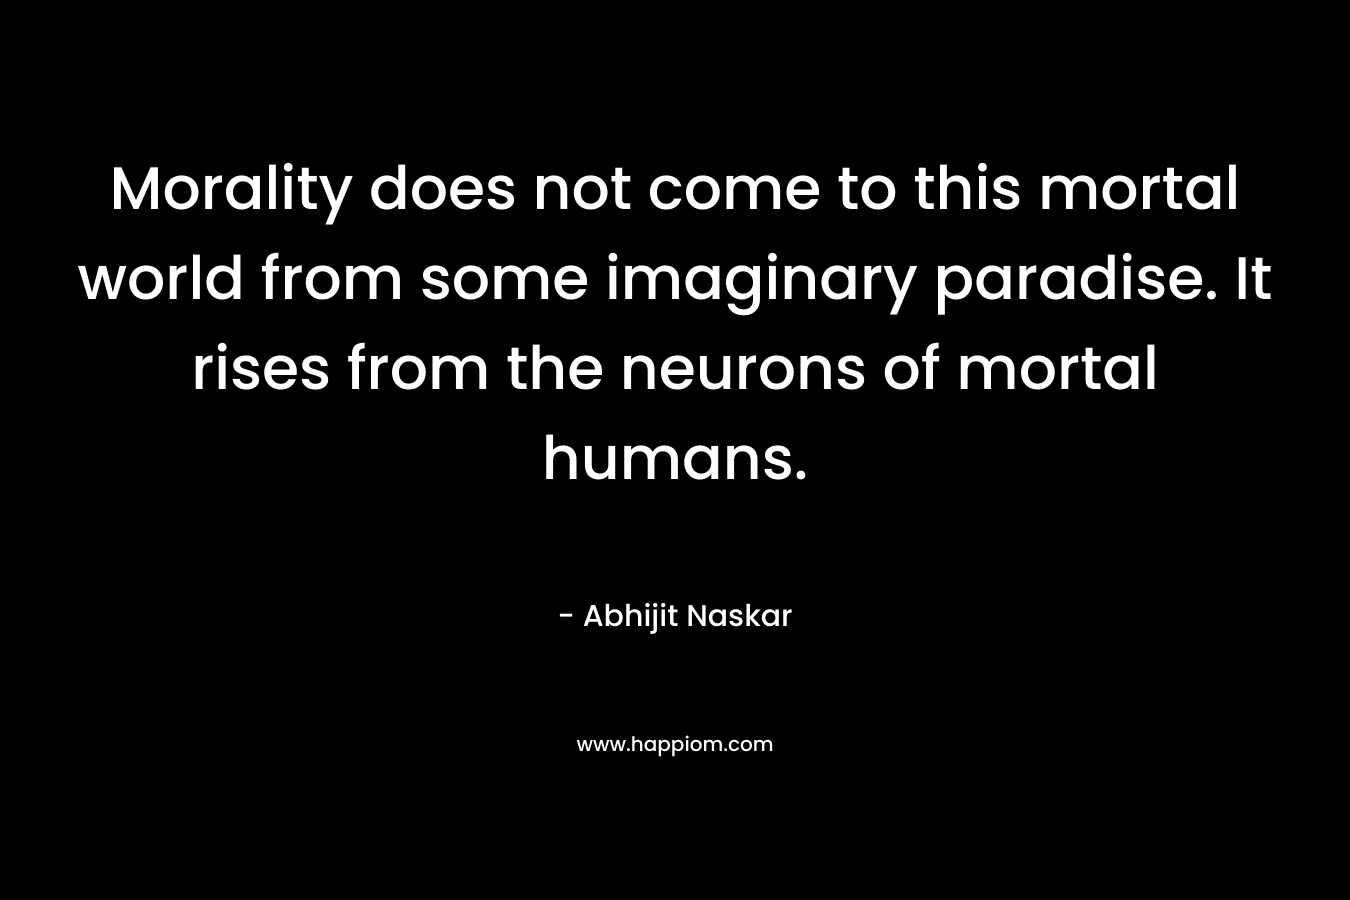 Morality does not come to this mortal world from some imaginary paradise. It rises from the neurons of mortal humans.